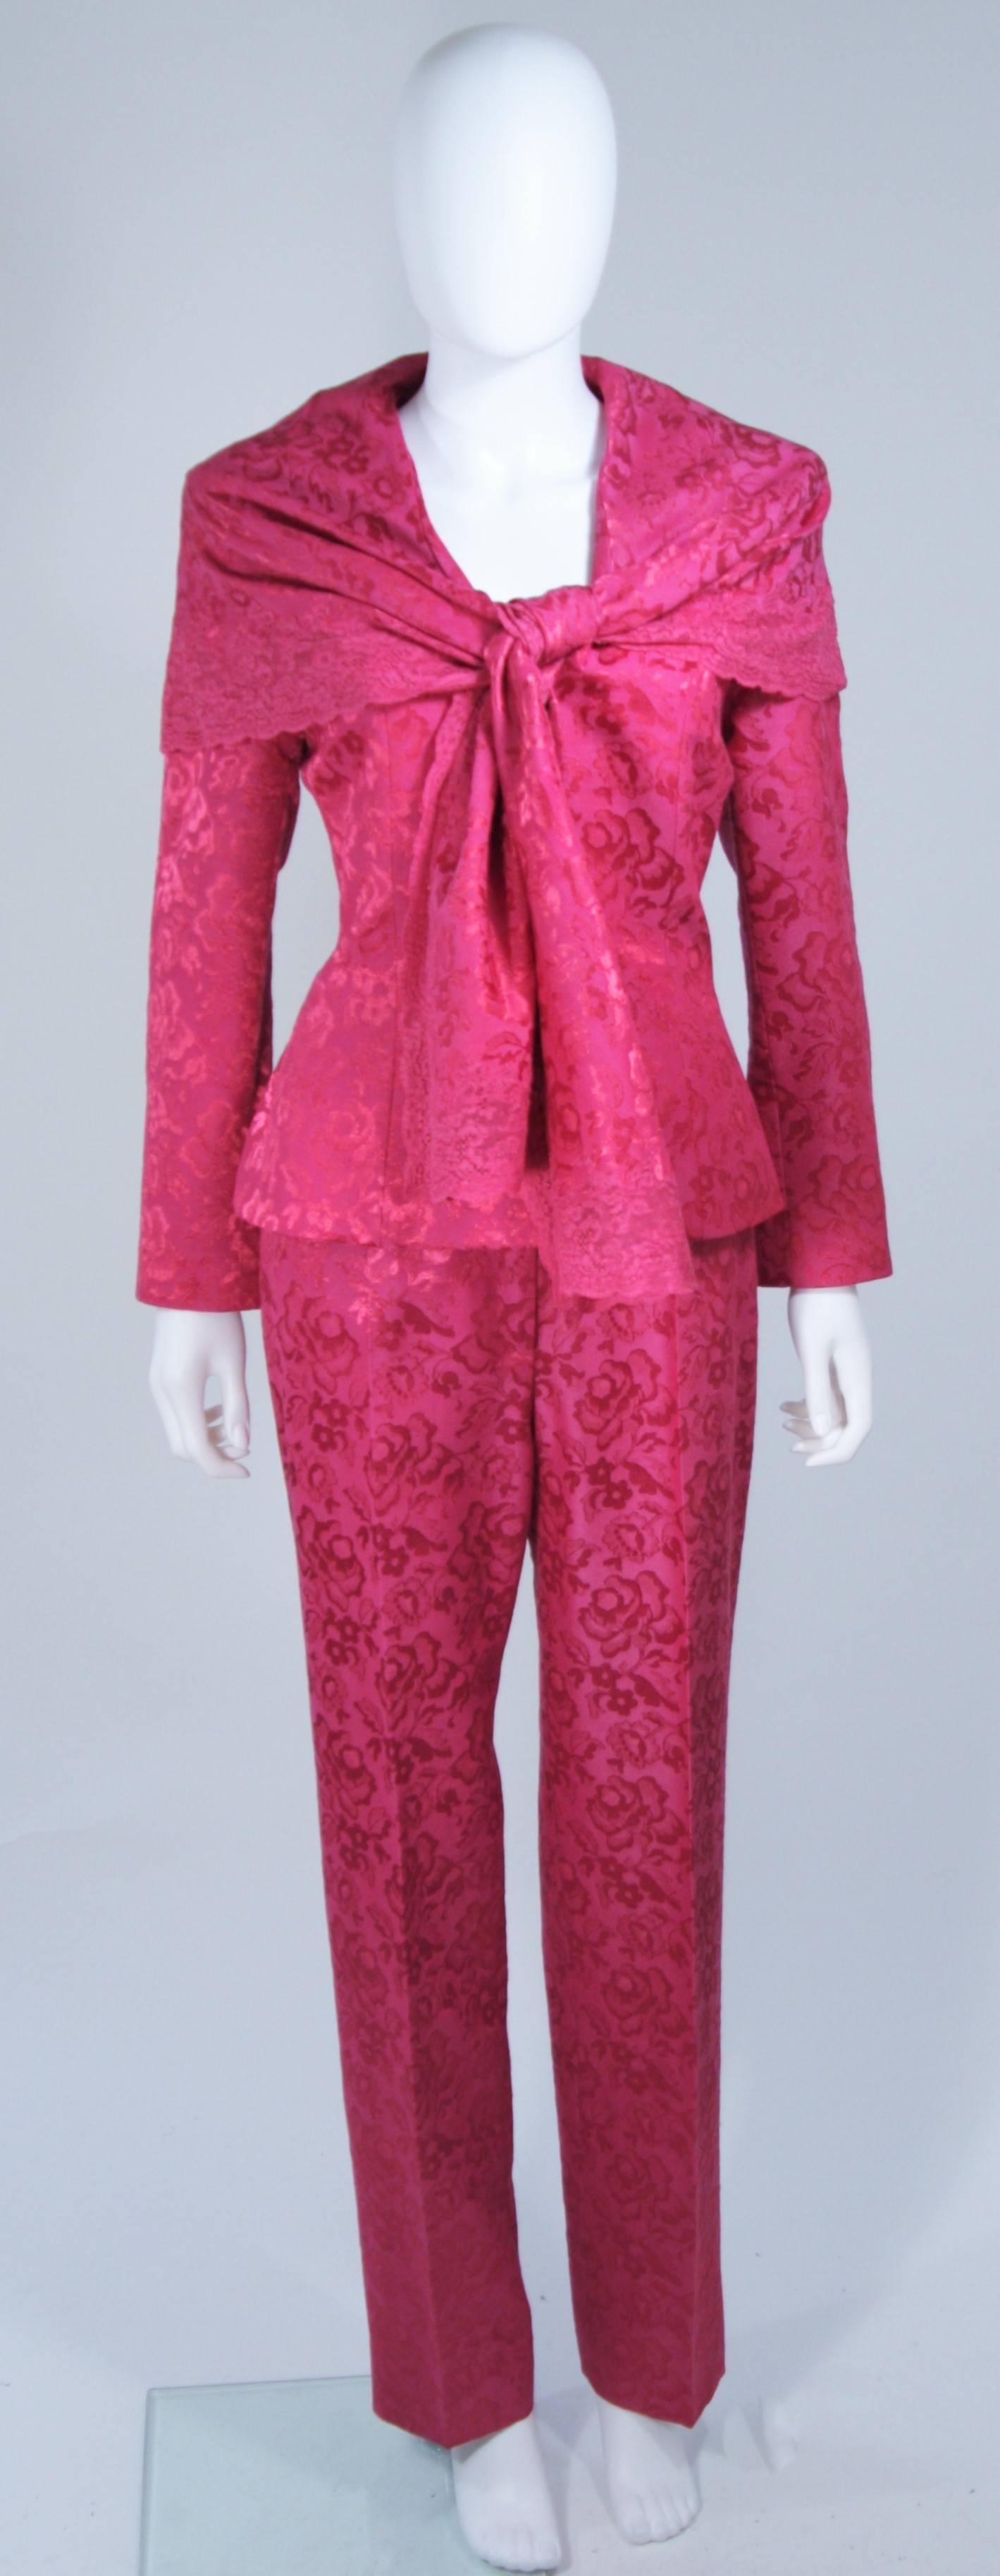 Women's CHRISTIAN DIOR Pink Wool Lace Trim Ensemble with Pants and Skirt Size 10 42